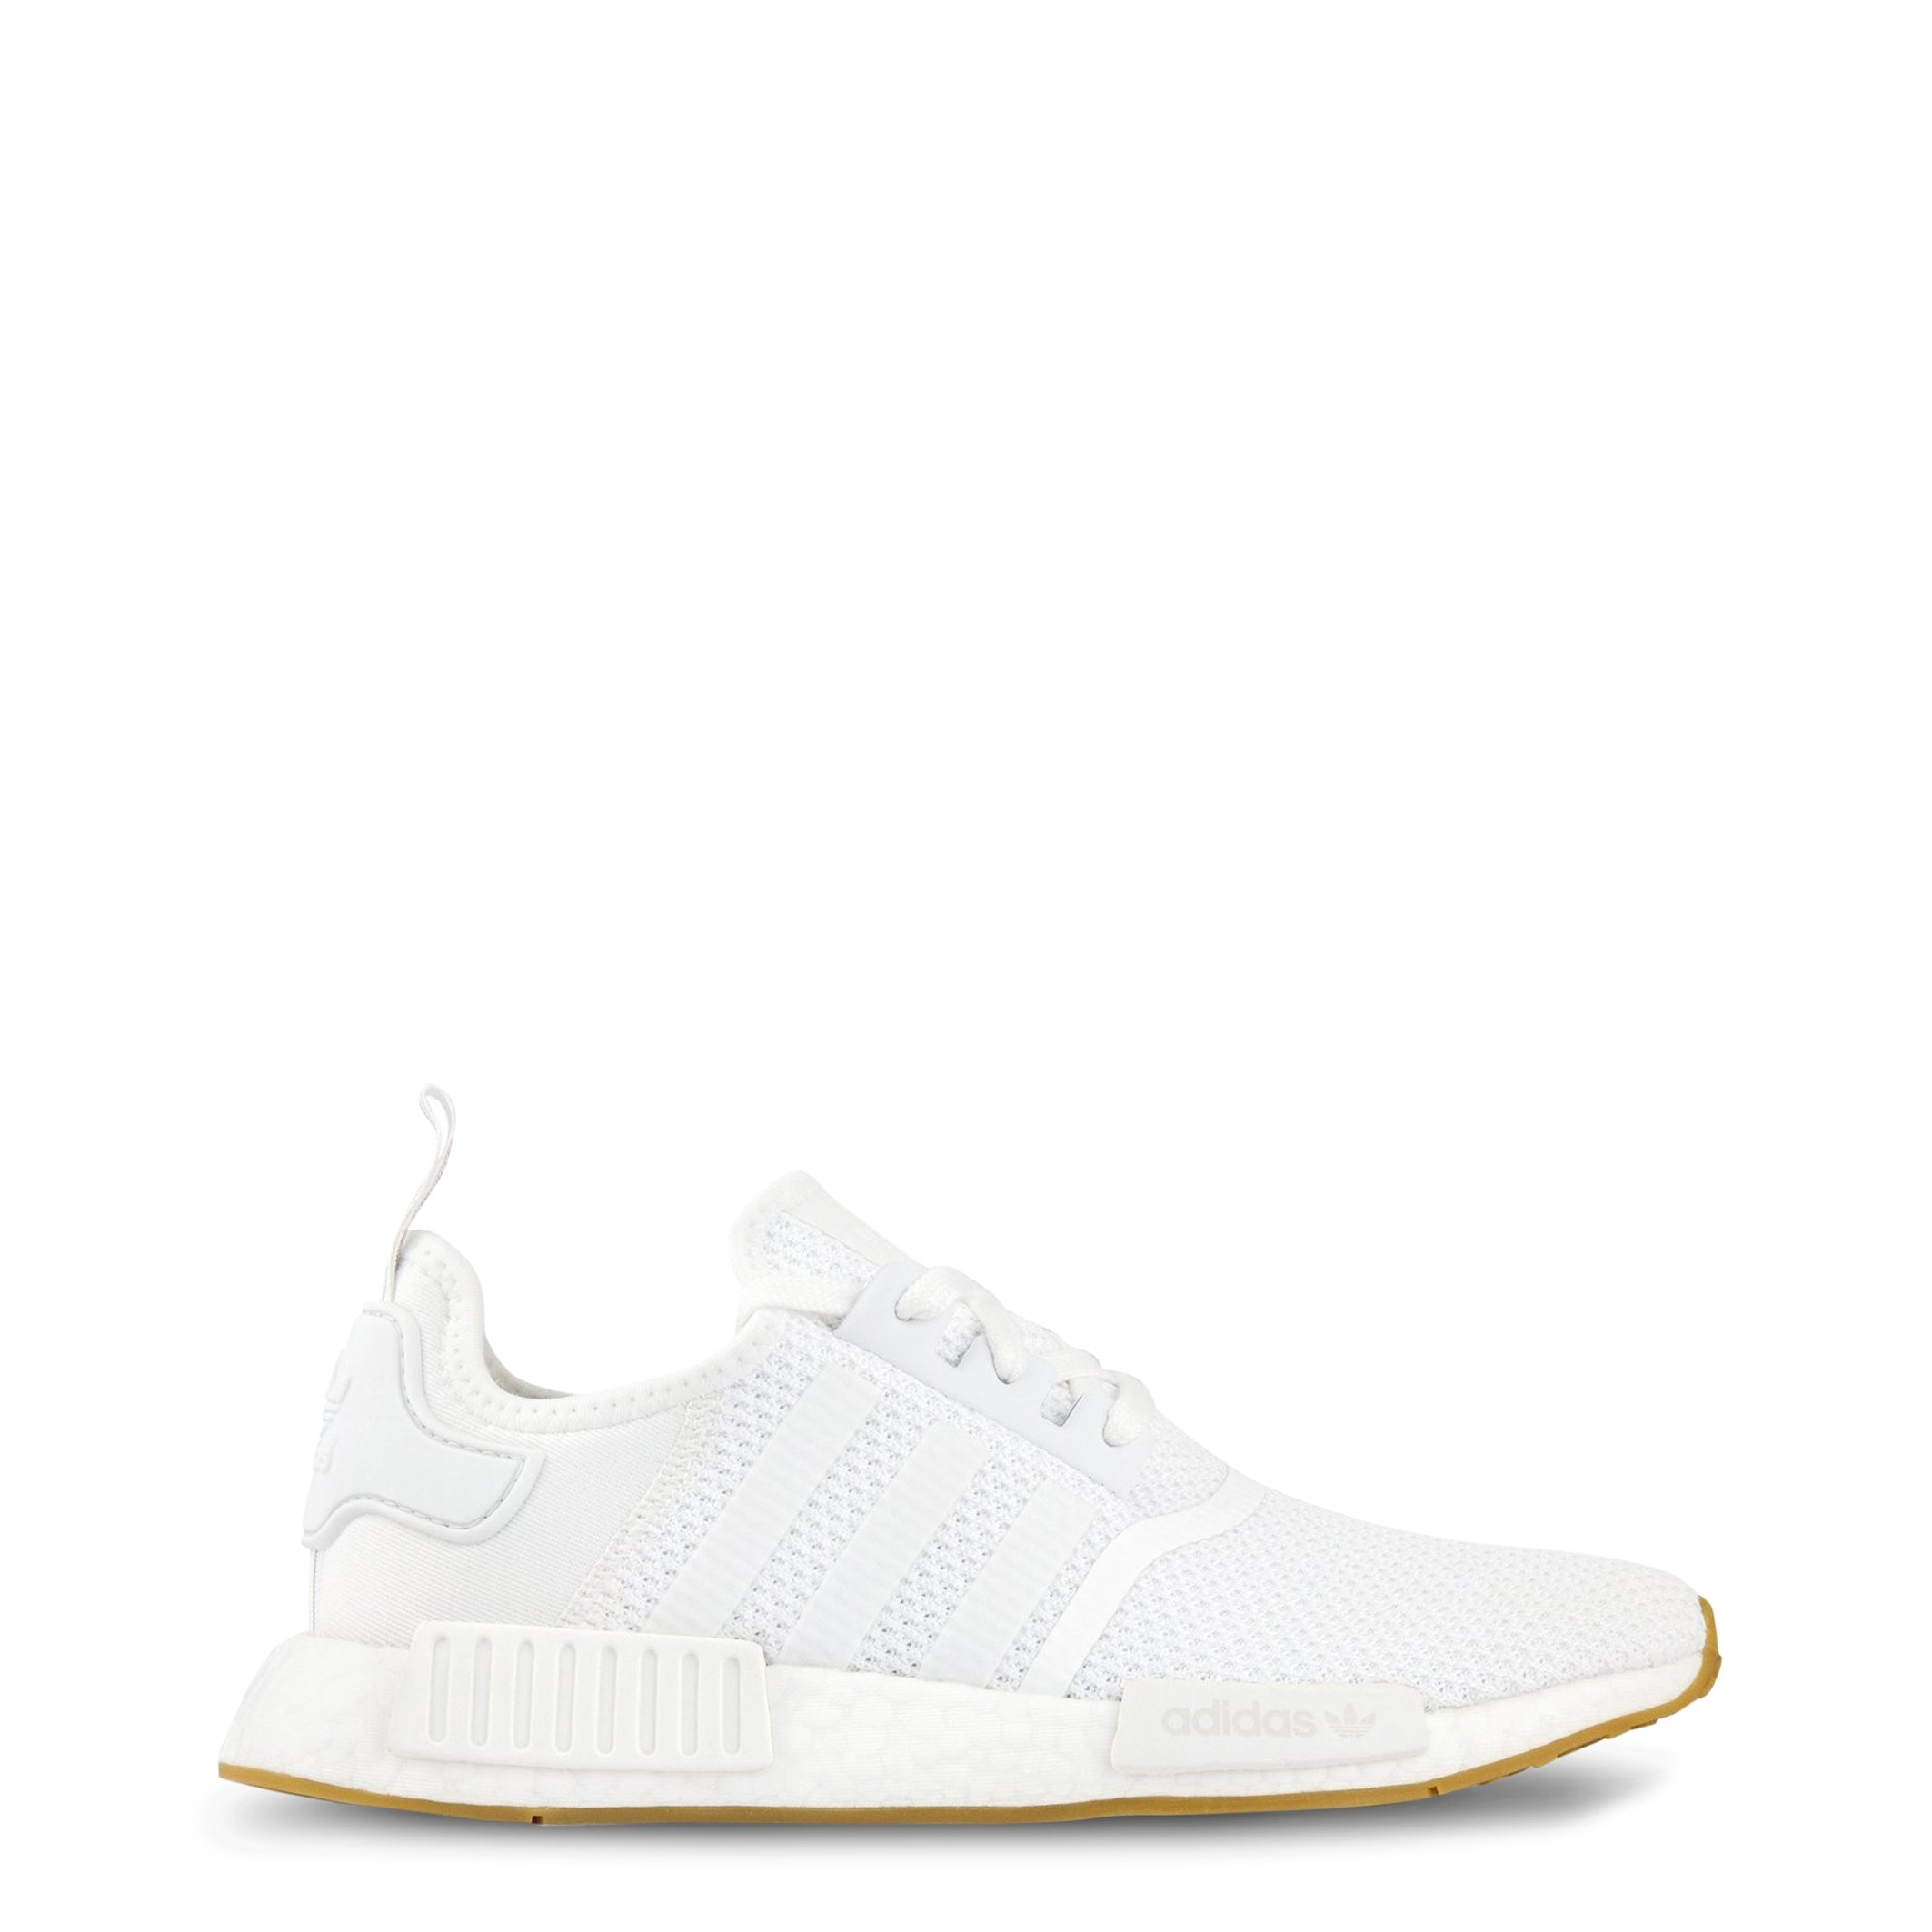 Adidas – NMD-R1_STLT – Shoes Sneakers – White / Uk 5.5 – Love Your Fashion